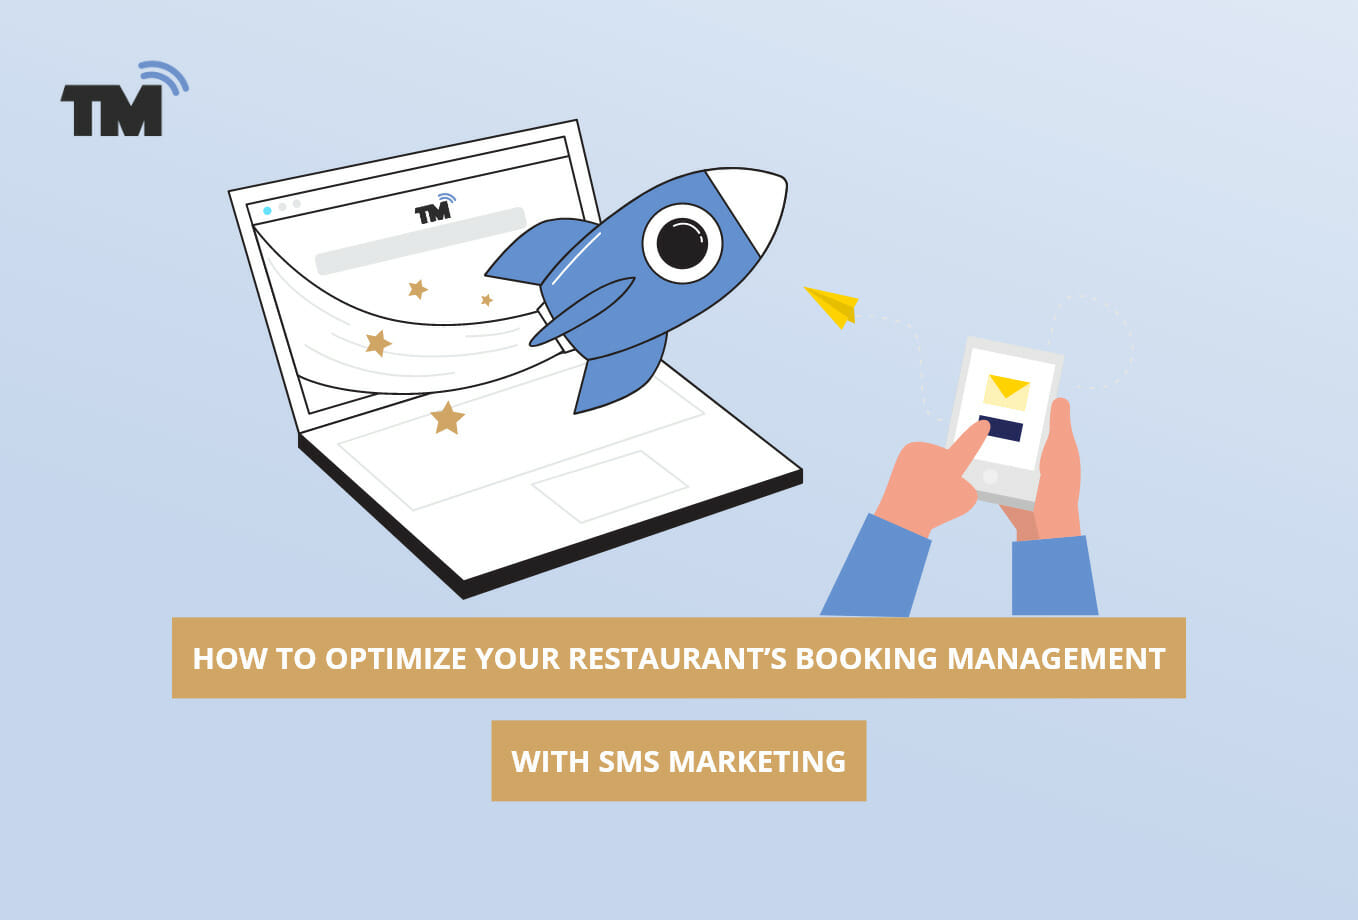 How to Optimize Your Restaurant’s Booking Management with SMS Marketing